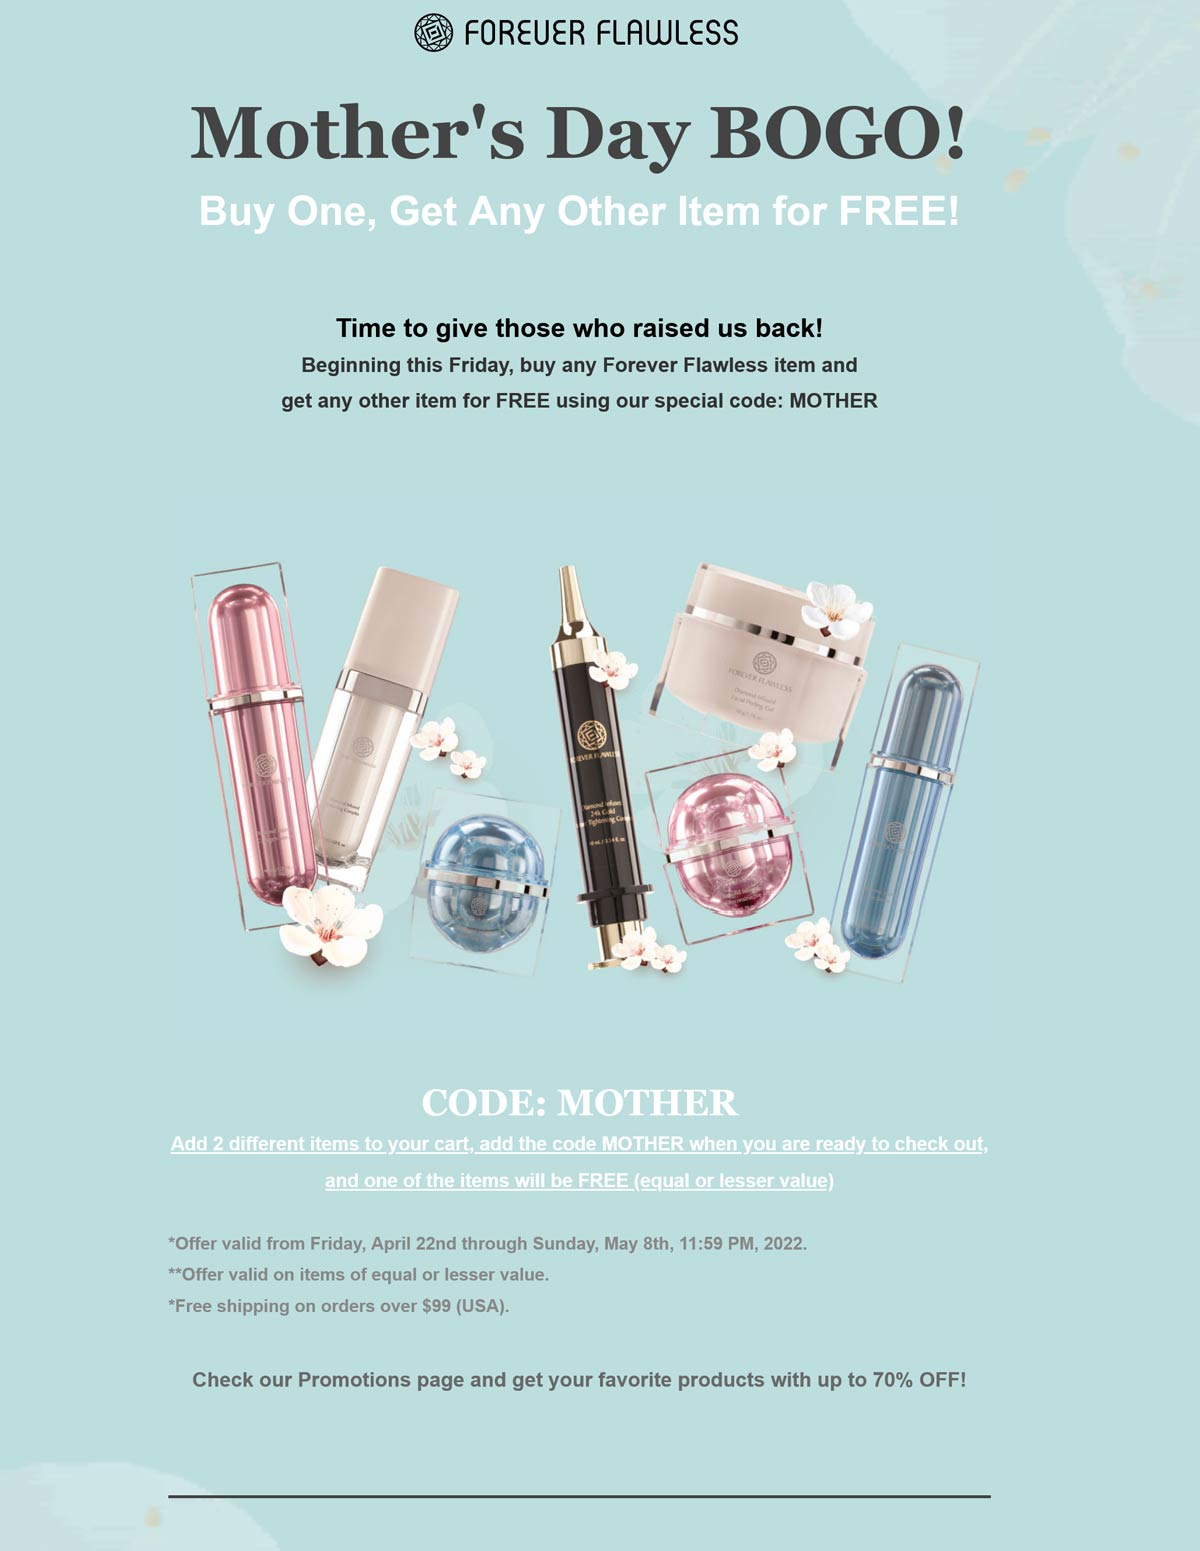 Forever Flawless stores Coupon  Second item free today at Forever Flawless via promo code MOTHER #foreverflawless 